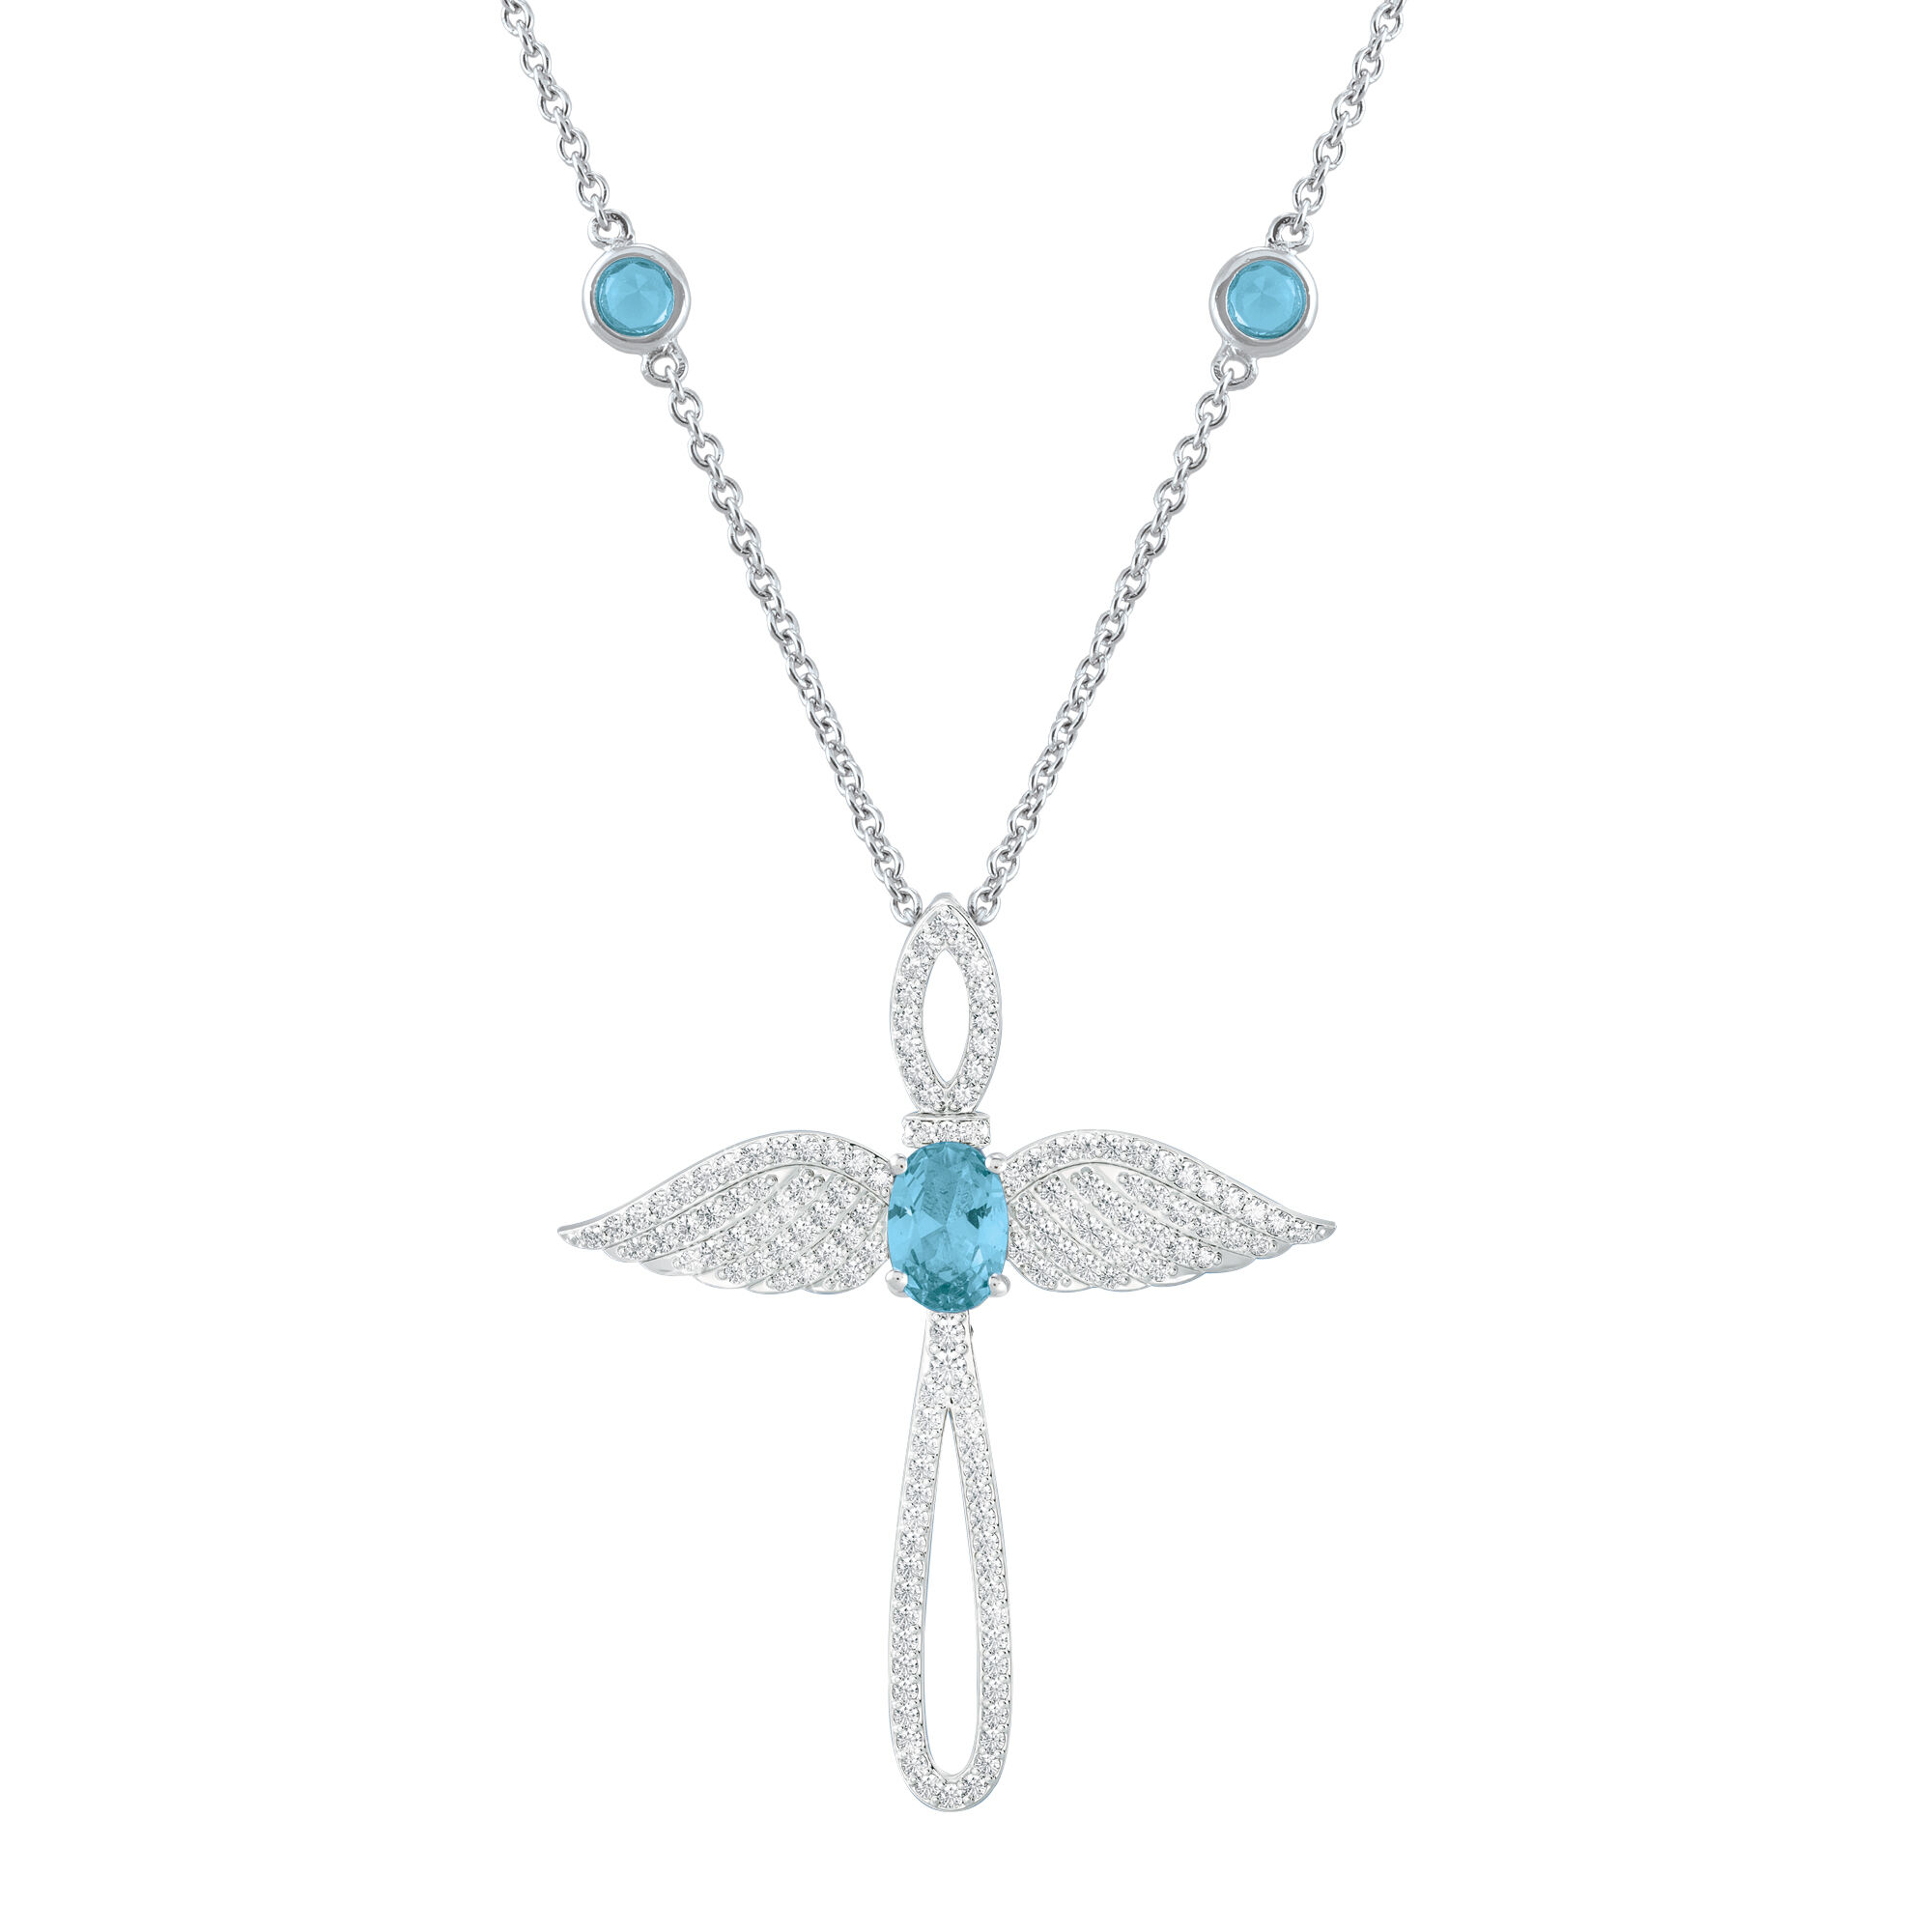 Touched by an Angel Birthstone Necklace 6842 0017 c march